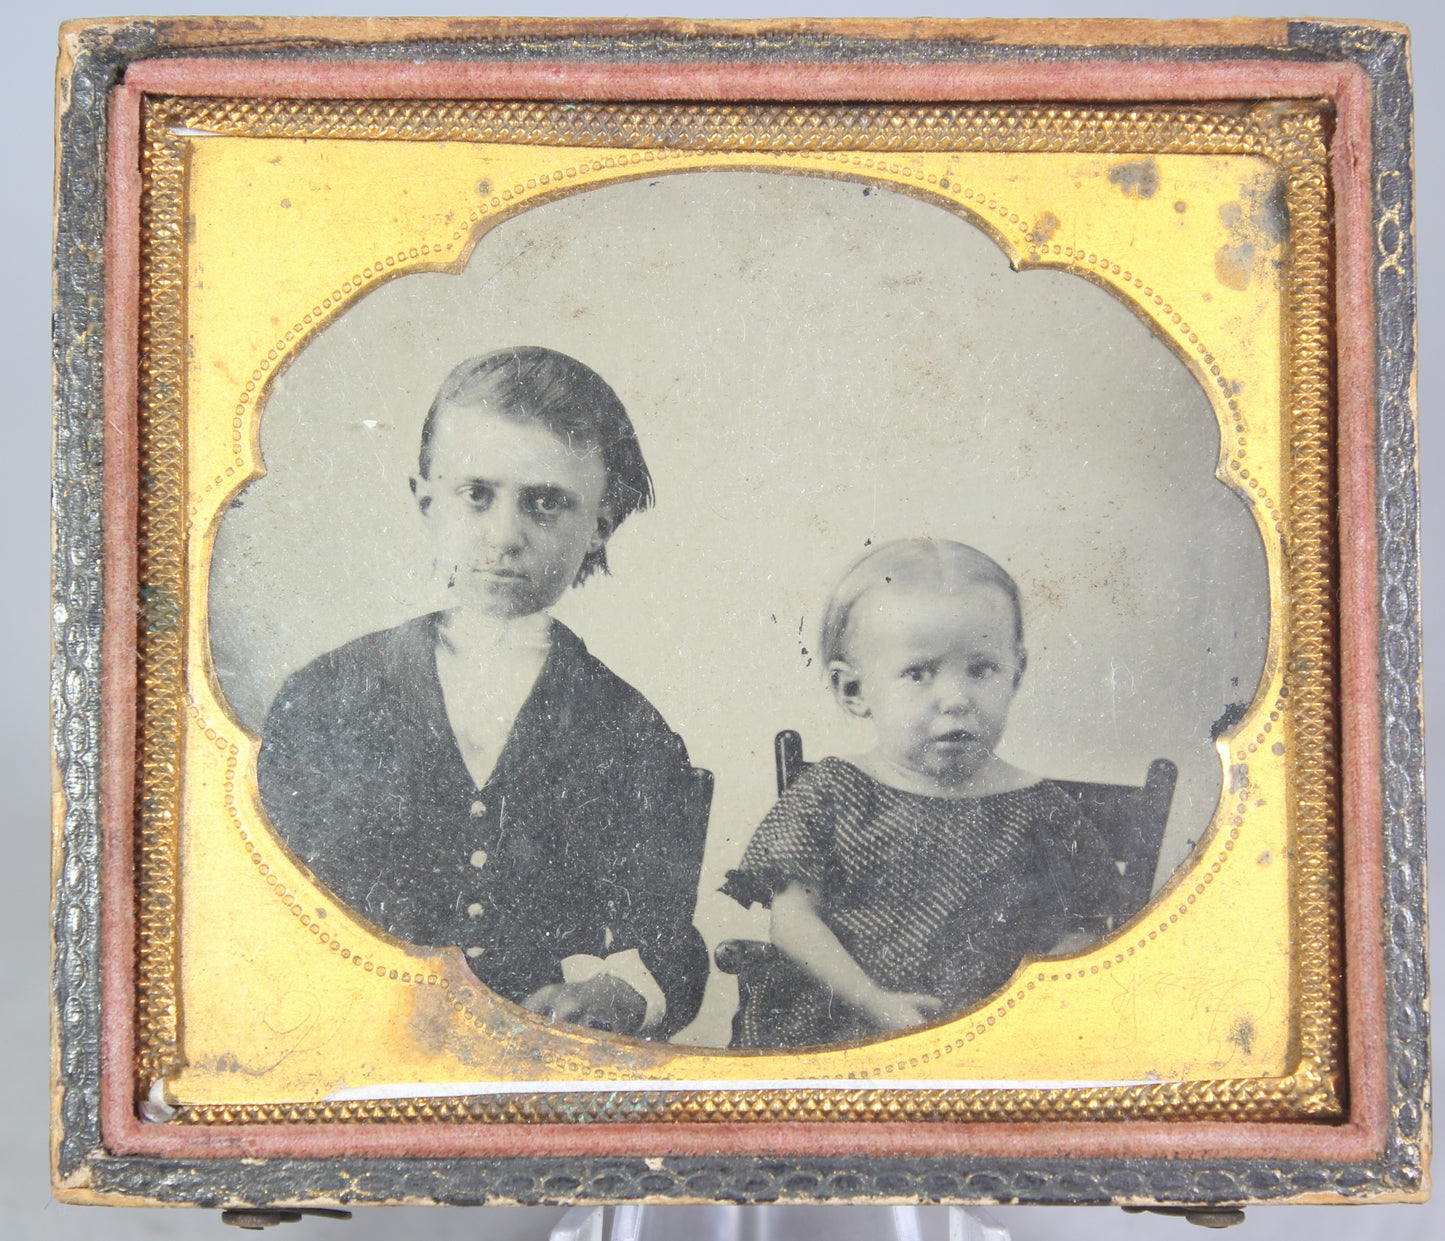 Ambrotype Photograph of Siblings with Concerned Expressions in Case